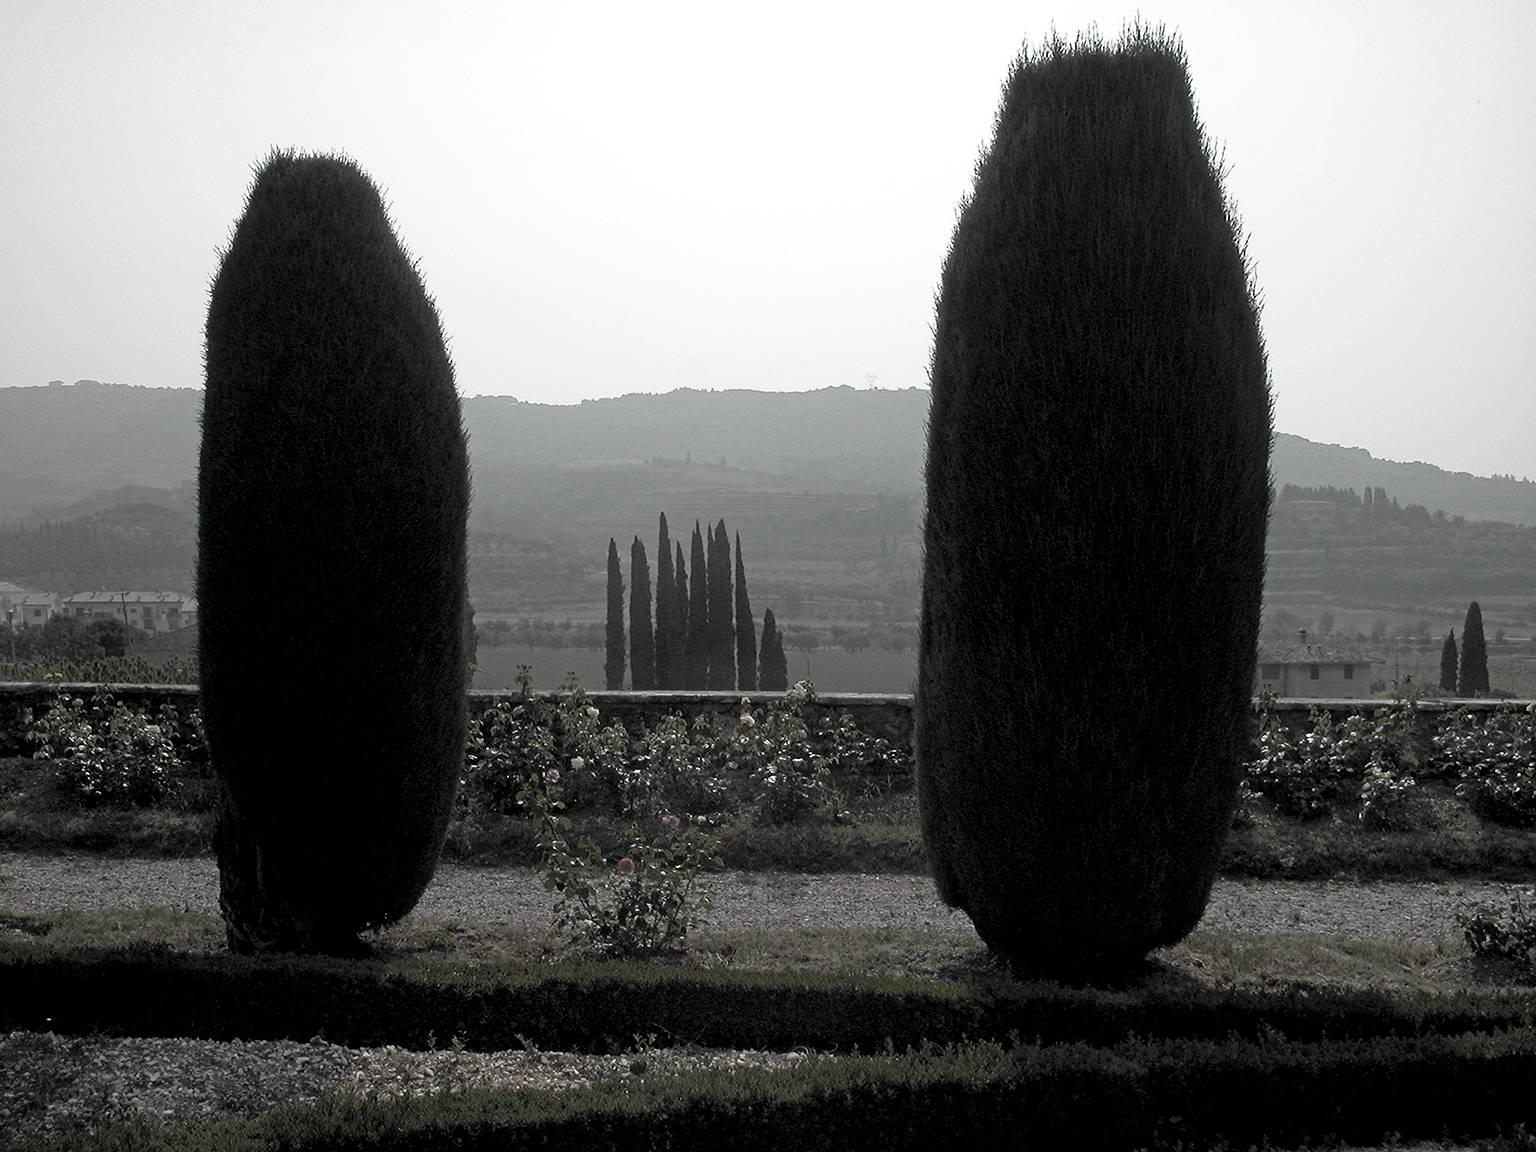 Douglas Busch Black and White Photograph - Hedges at Dusk, Italy